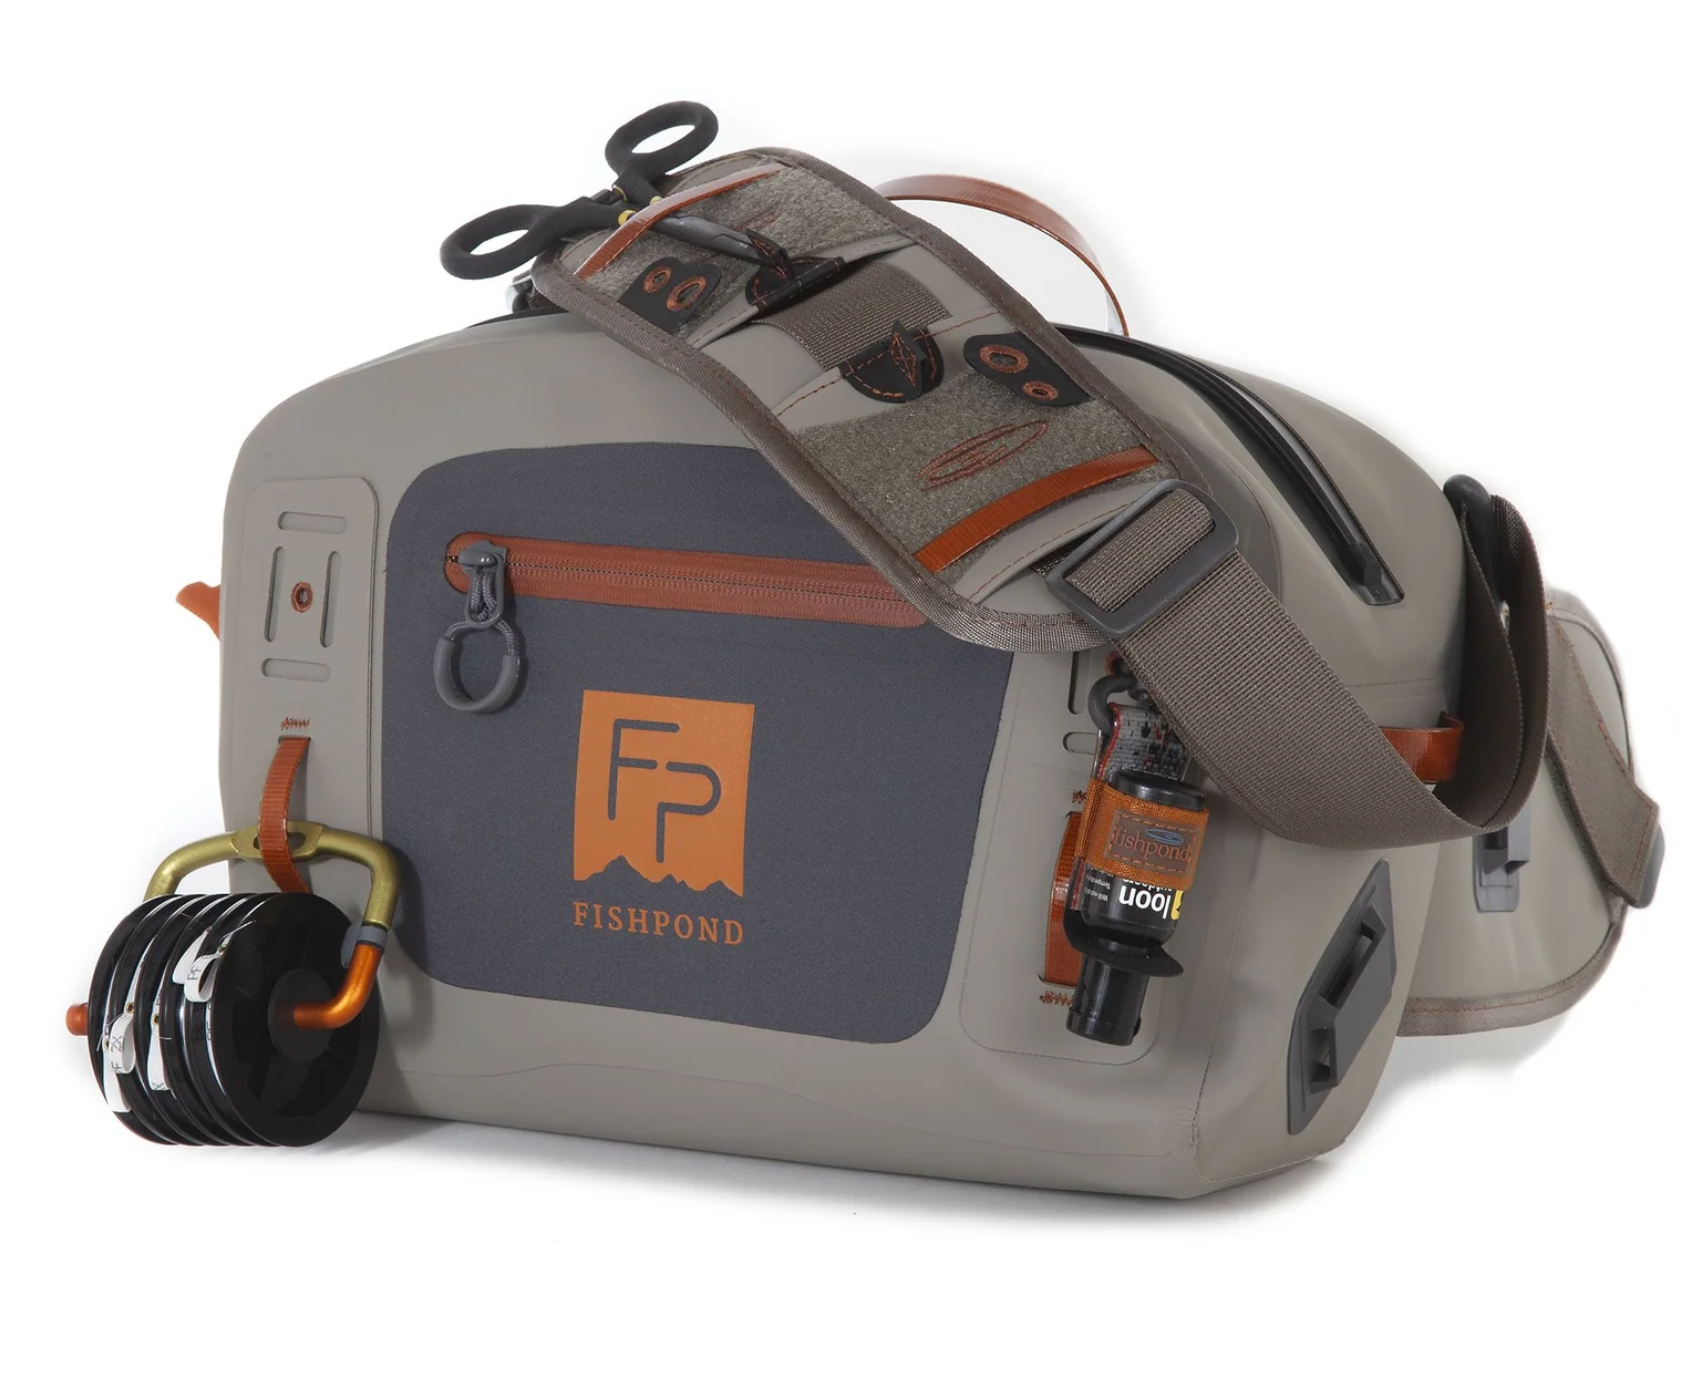 Fishpond Thunderhead Submersible Lumbar Pack - ECO SHALE - Mansfield Hunting & Fishing - Products to prepare for Corona Virus